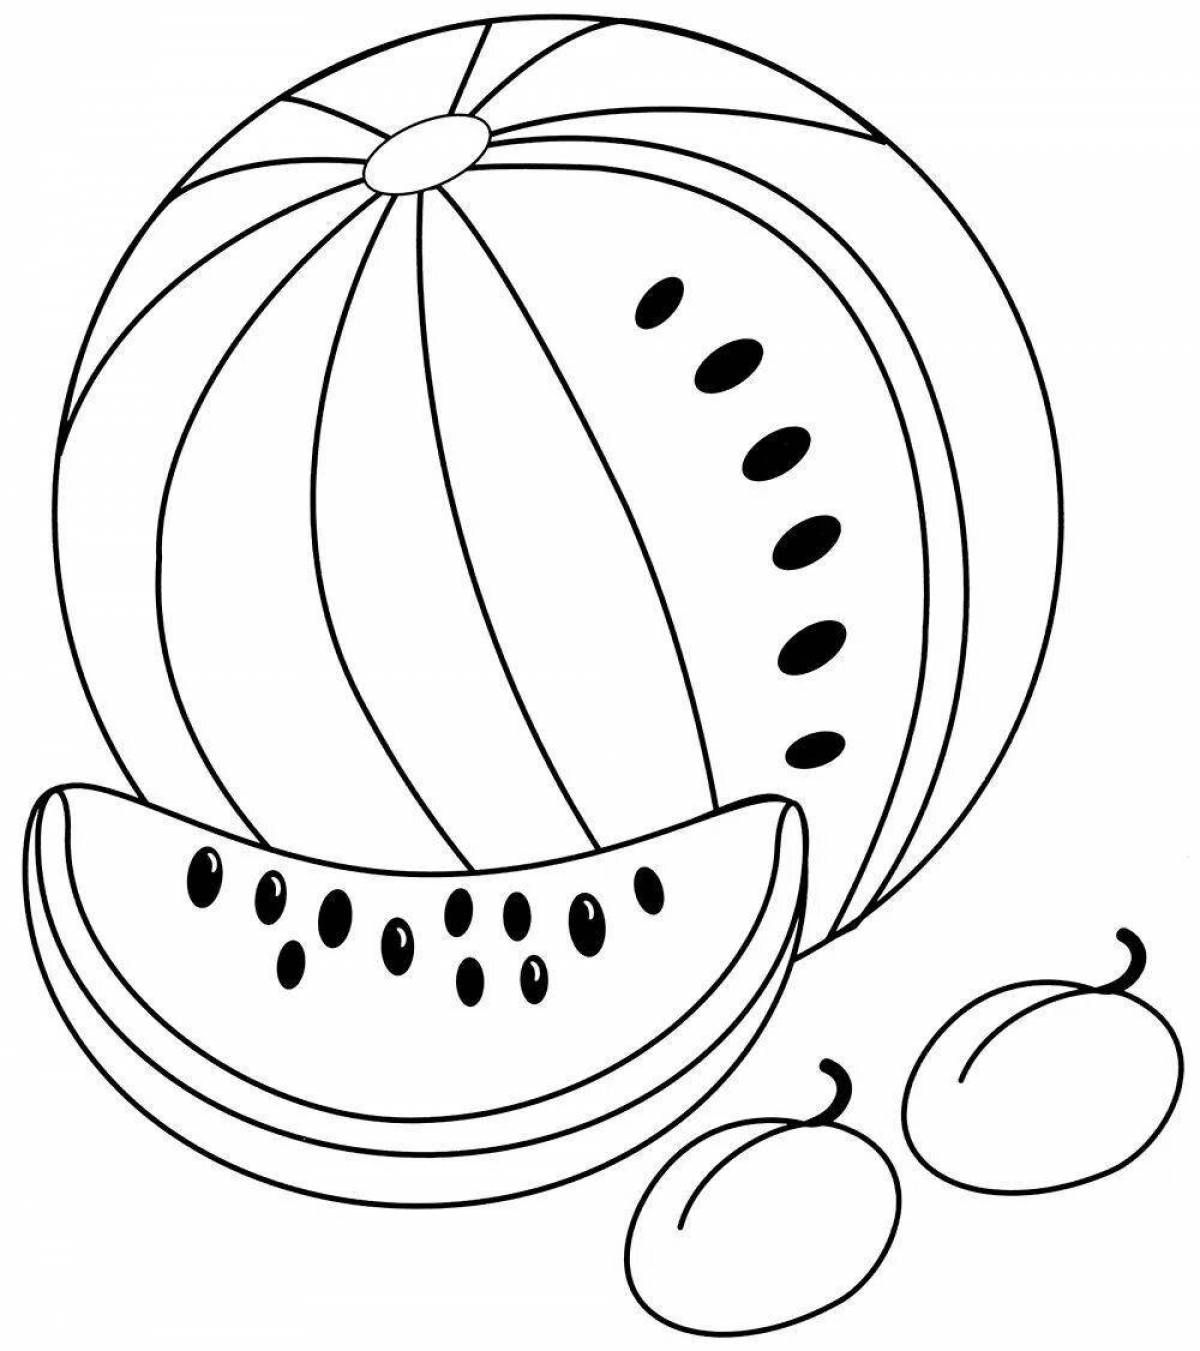 Happy watermelon coloring book for kids